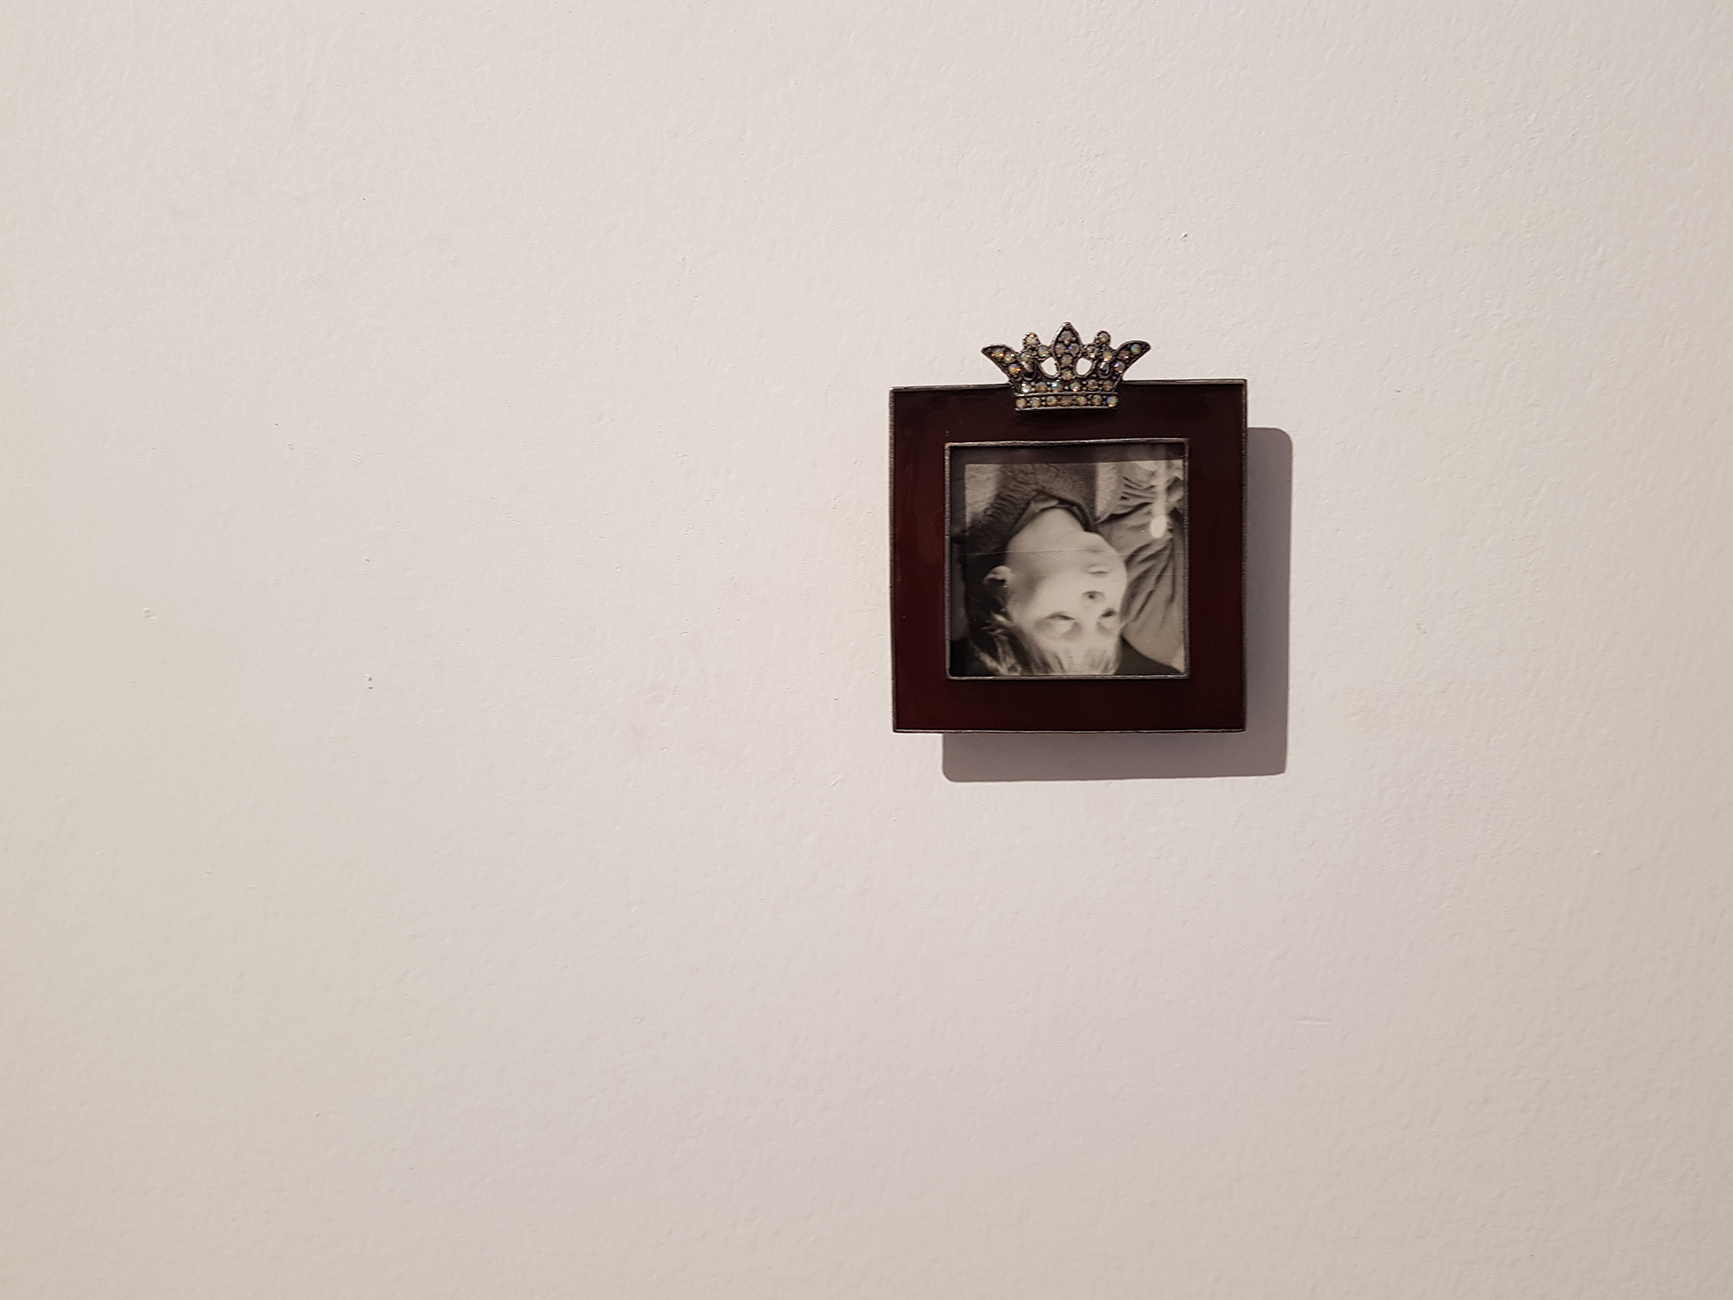 Dust, 2018, photo from artist's archive, photo frame with diamond crown, 5x5cm